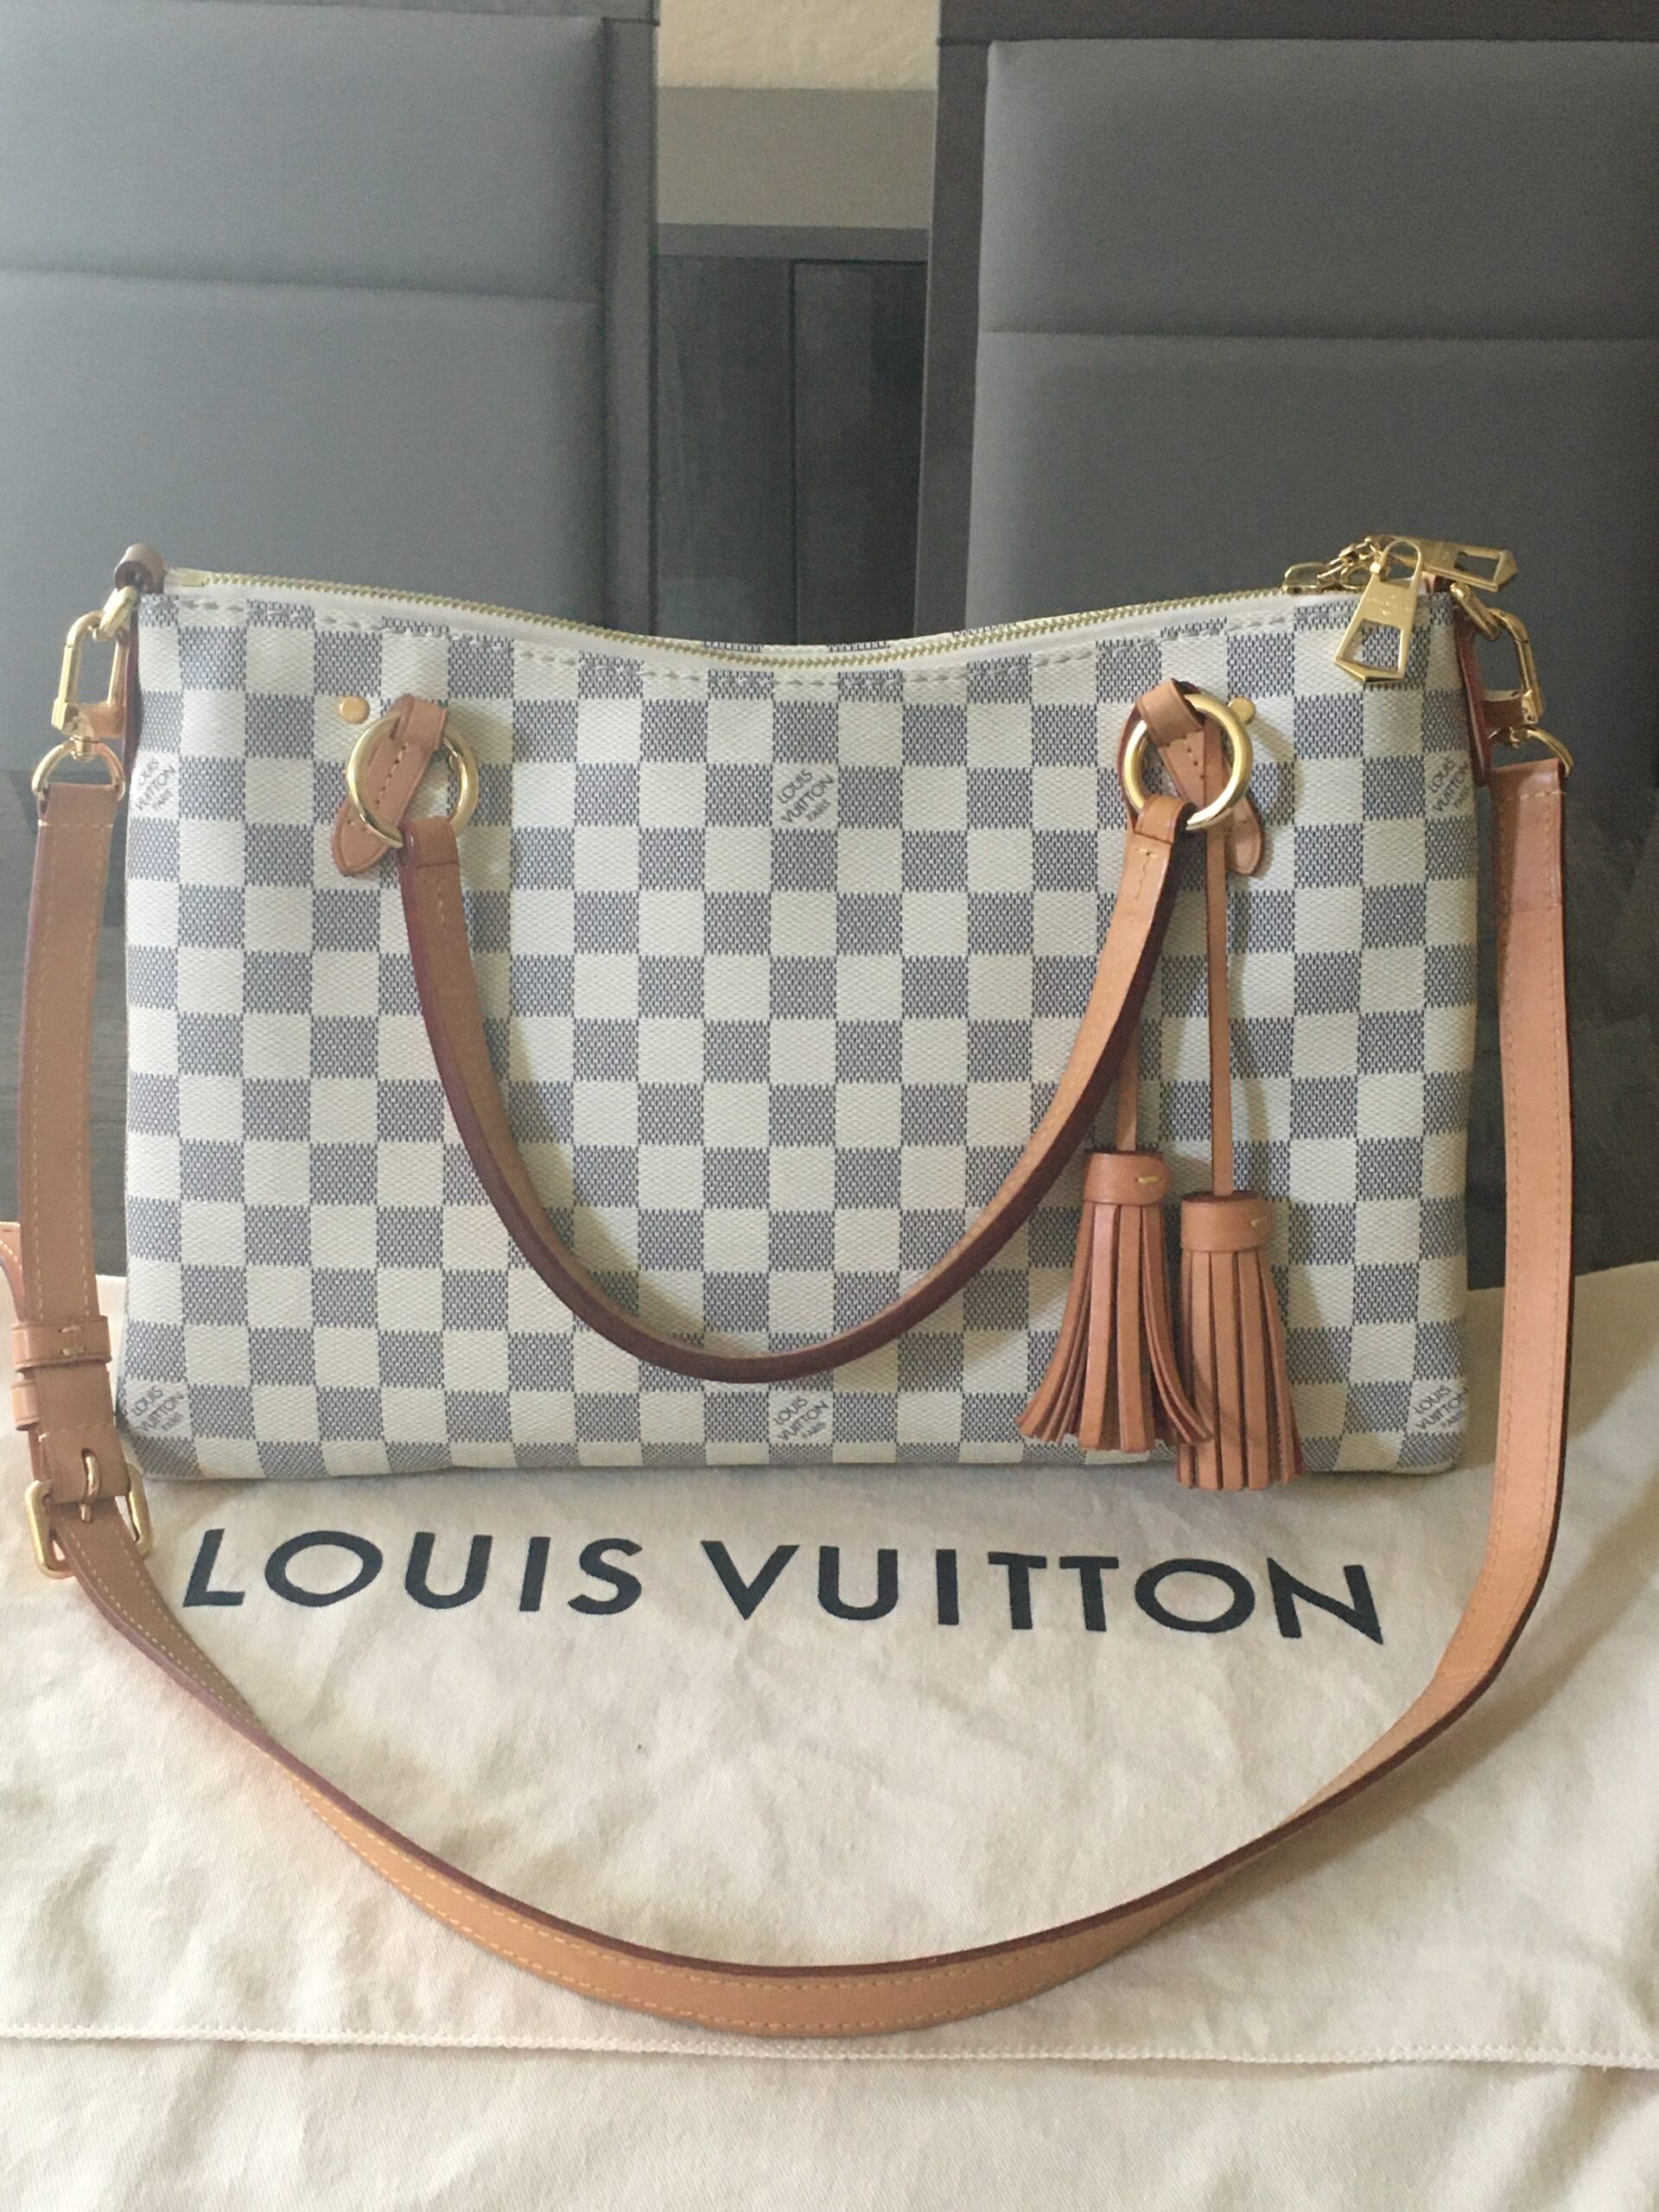 Louis Vuitton Damier Azur Lymington N40022 is just perfect for any